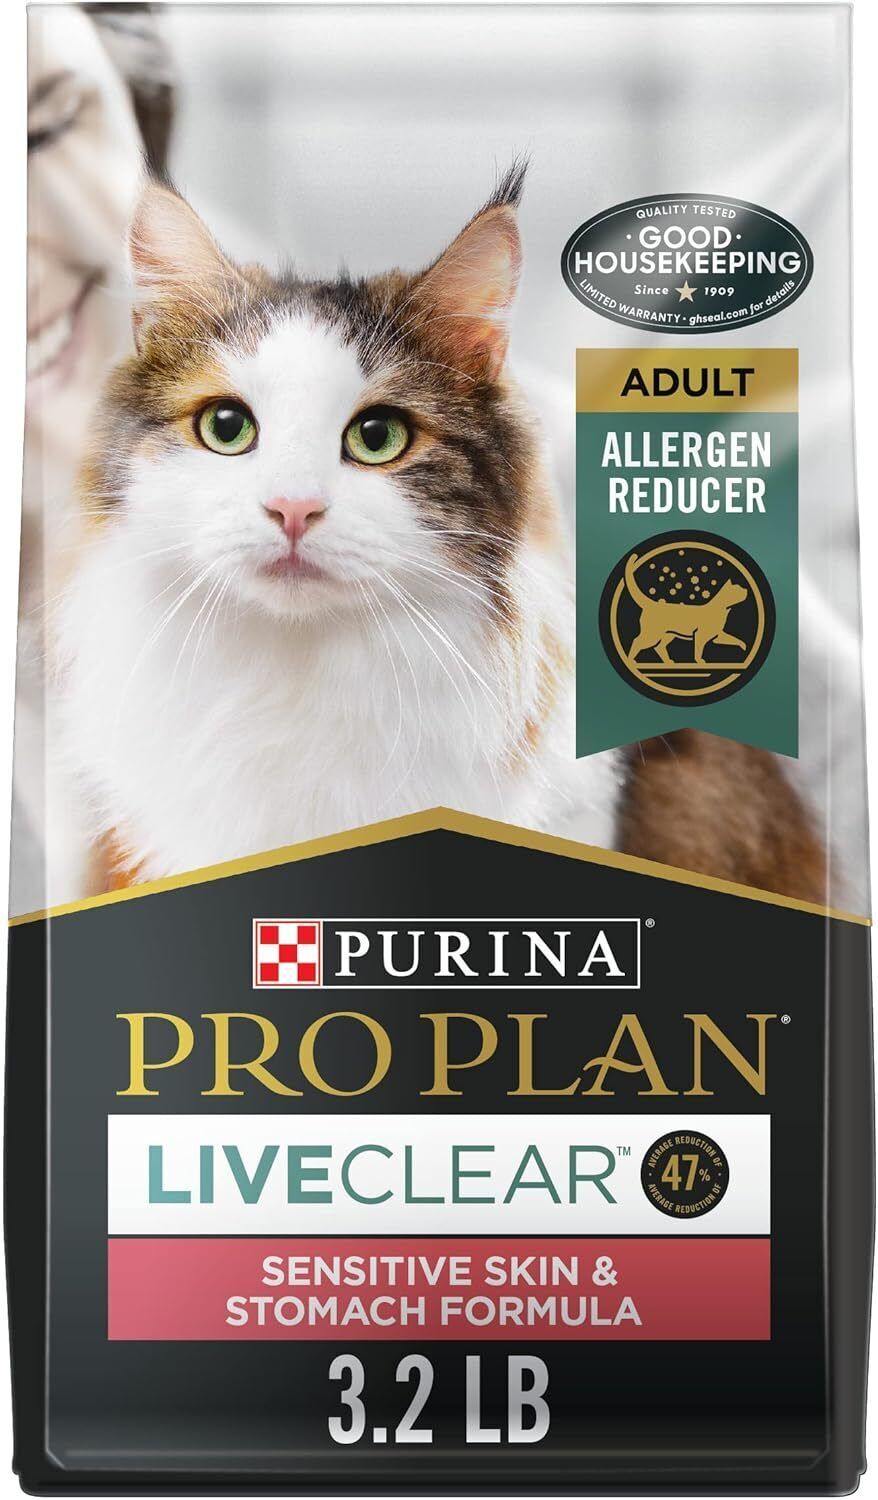 Purina Pro Plan Allergen Reducing, High Protein Cat Food, LIVECLEAR Turkey and - $33.14